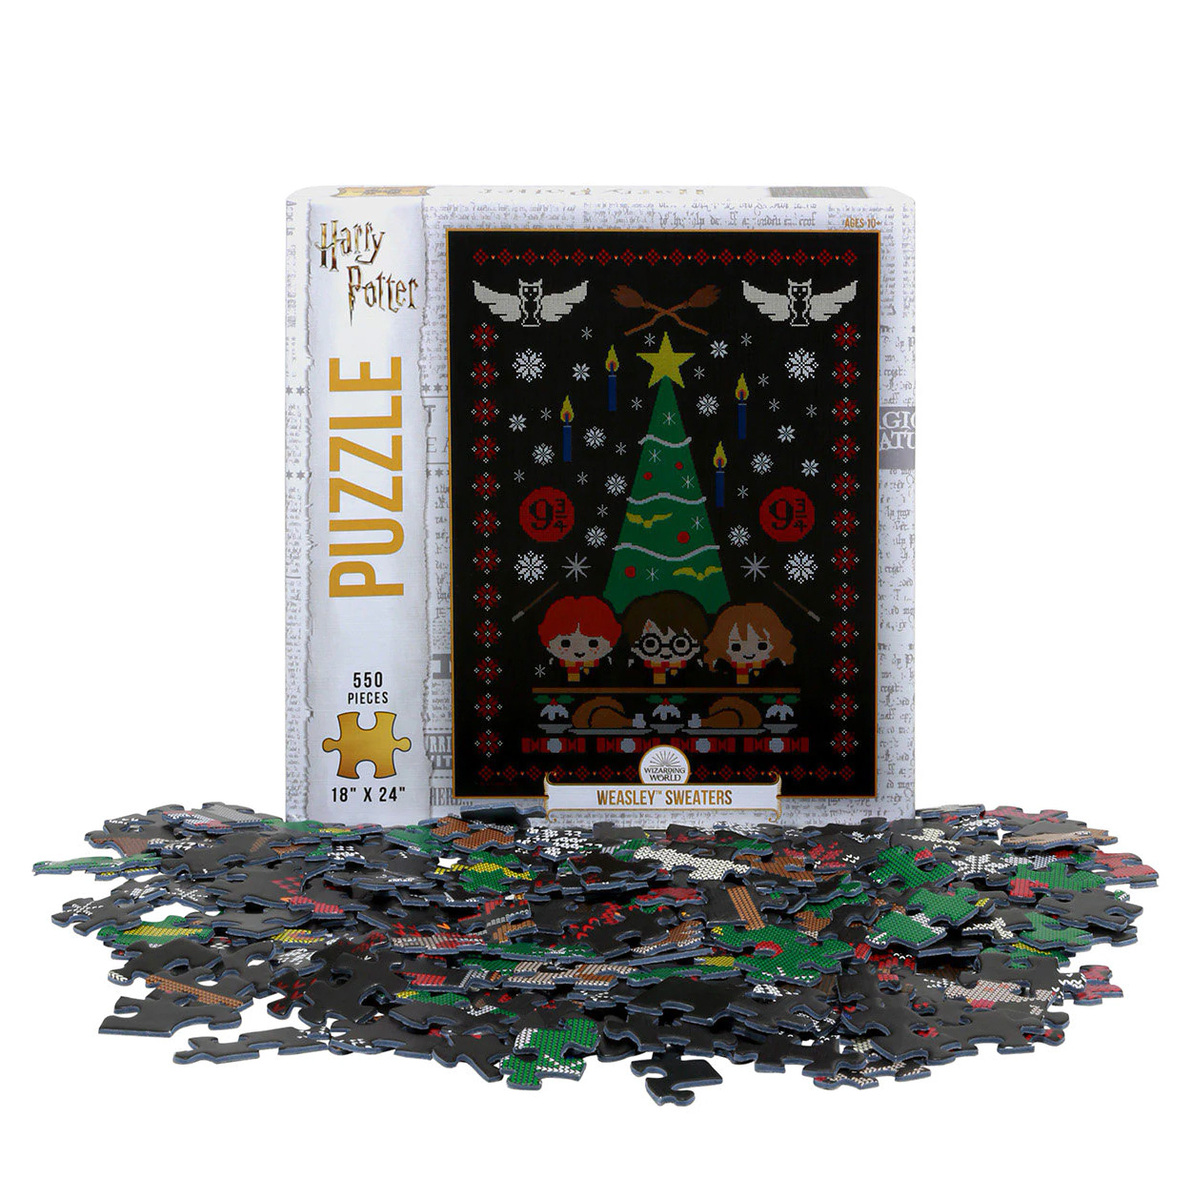 Harry Potter “Weasley Sweaters” Jigsaw Puzzle 550 Pieces